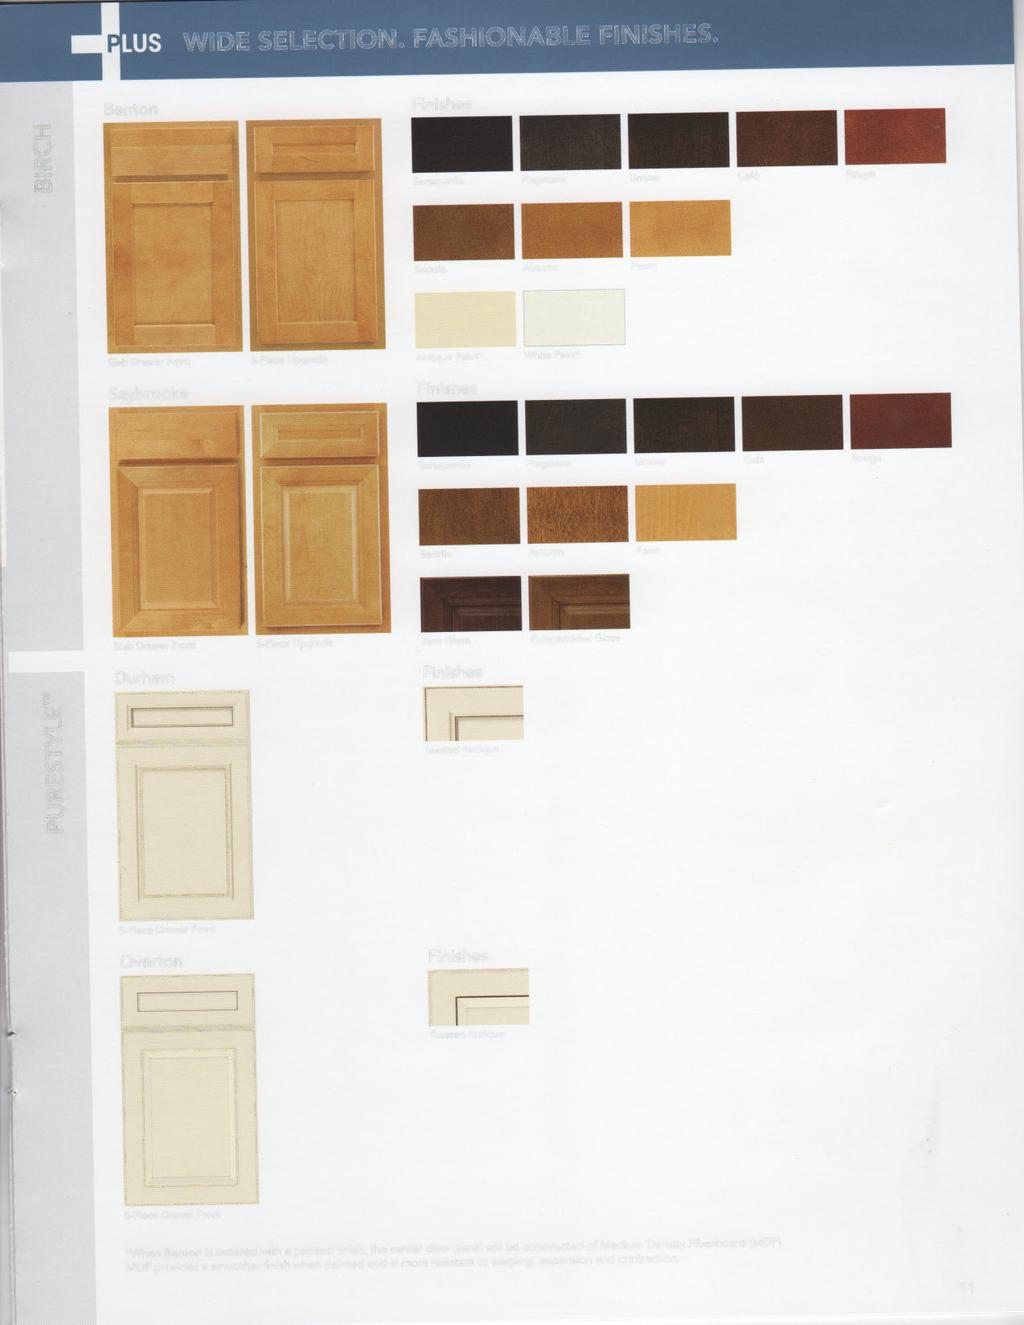 LUS WIDE SELECTION. FASHIONABLE FINISHES.